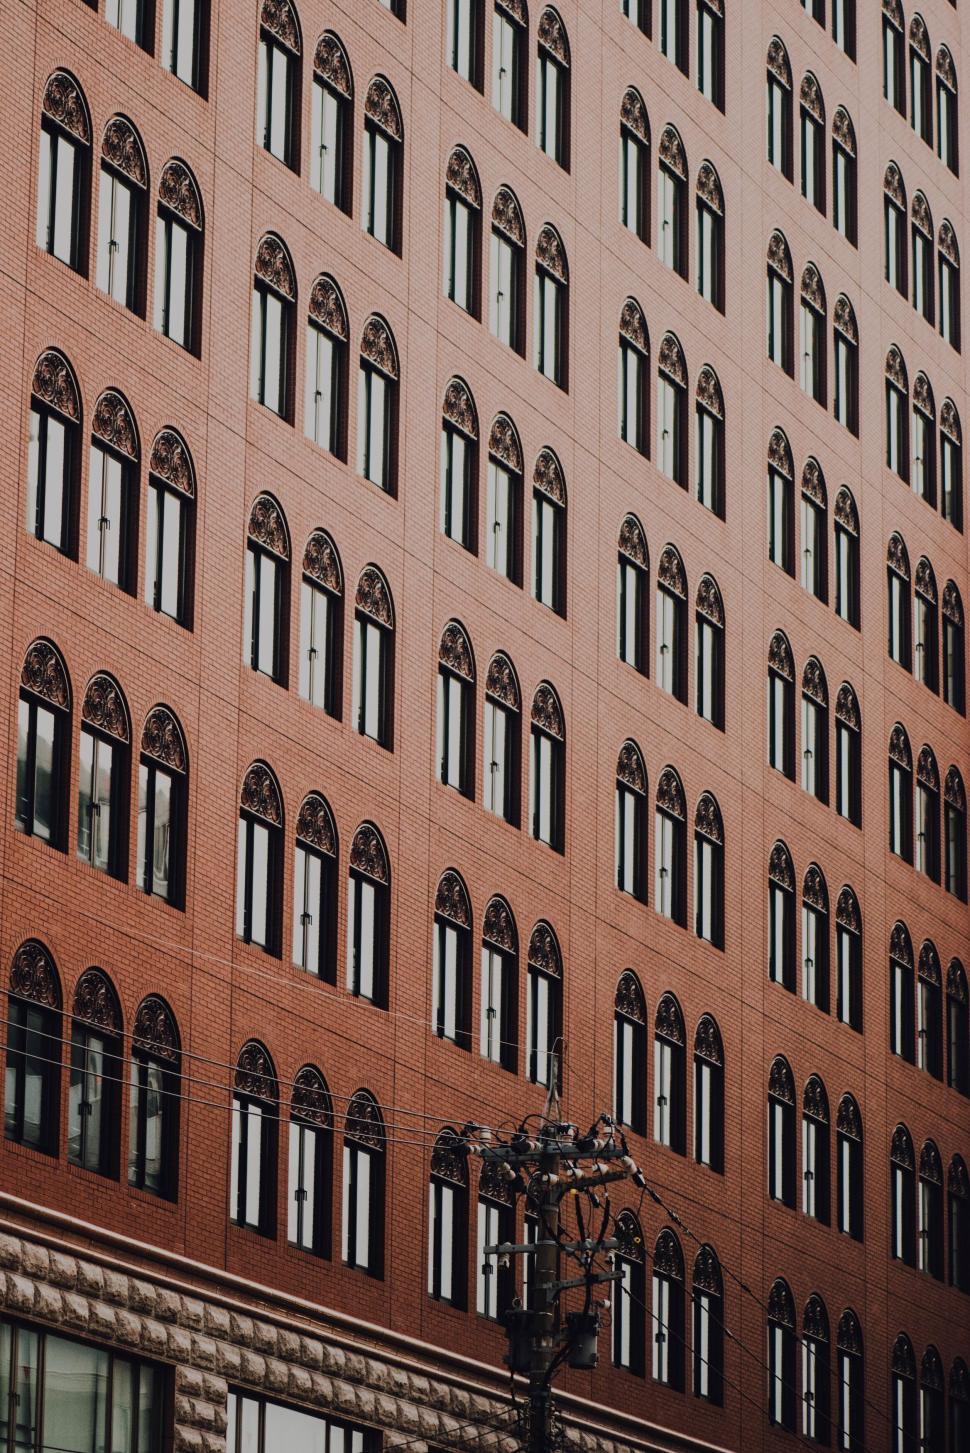 Free Image of Facade with repeating arched windows 